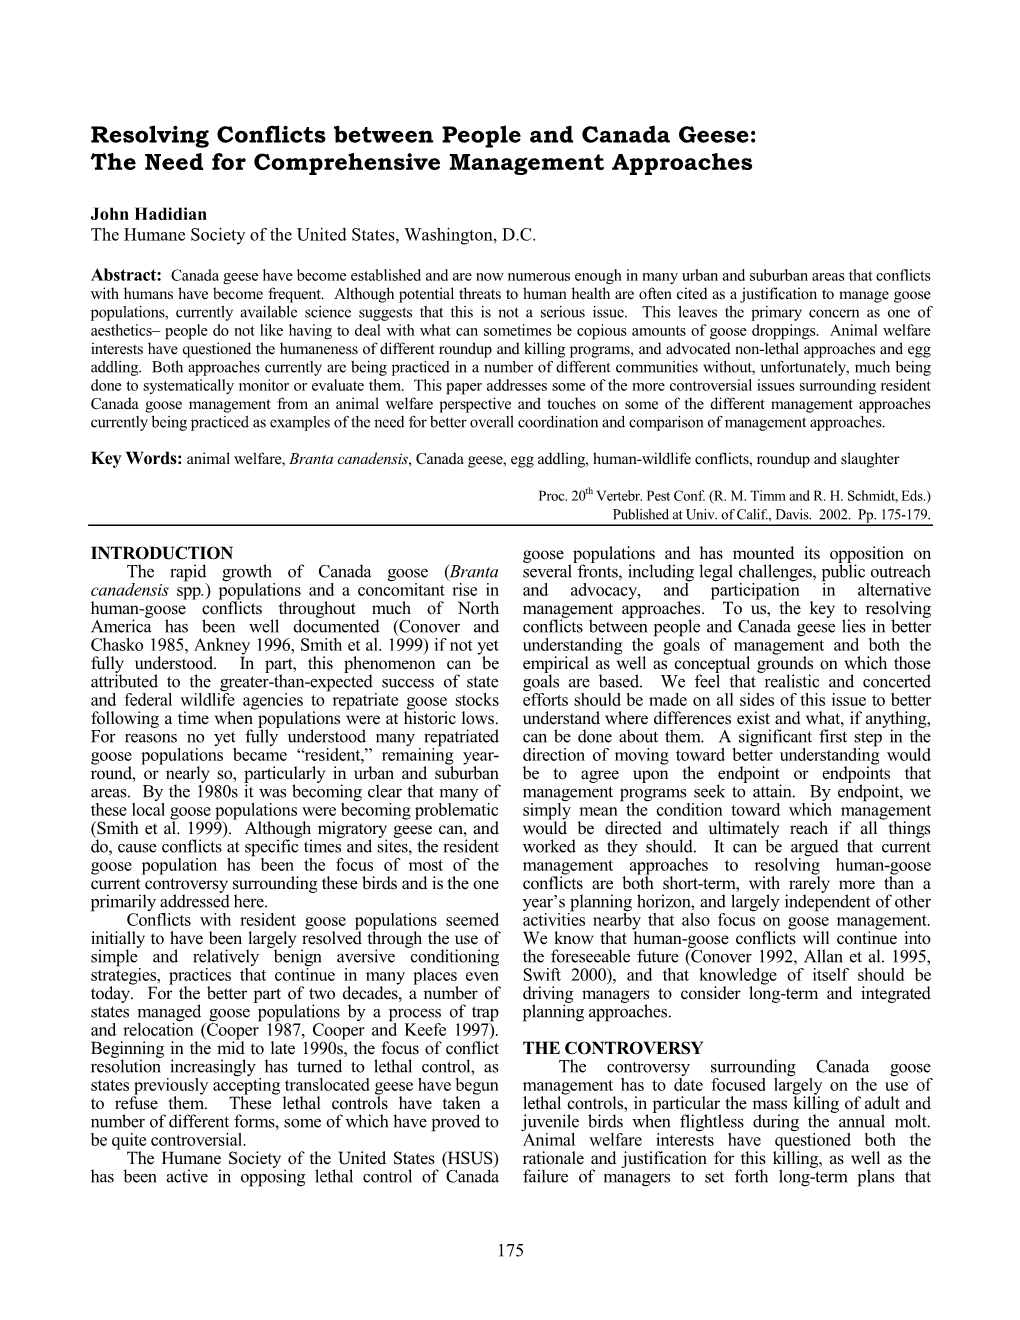 Resolving Conflicts Between People and Canada Geese: the Need for Comprehensive Management Approaches